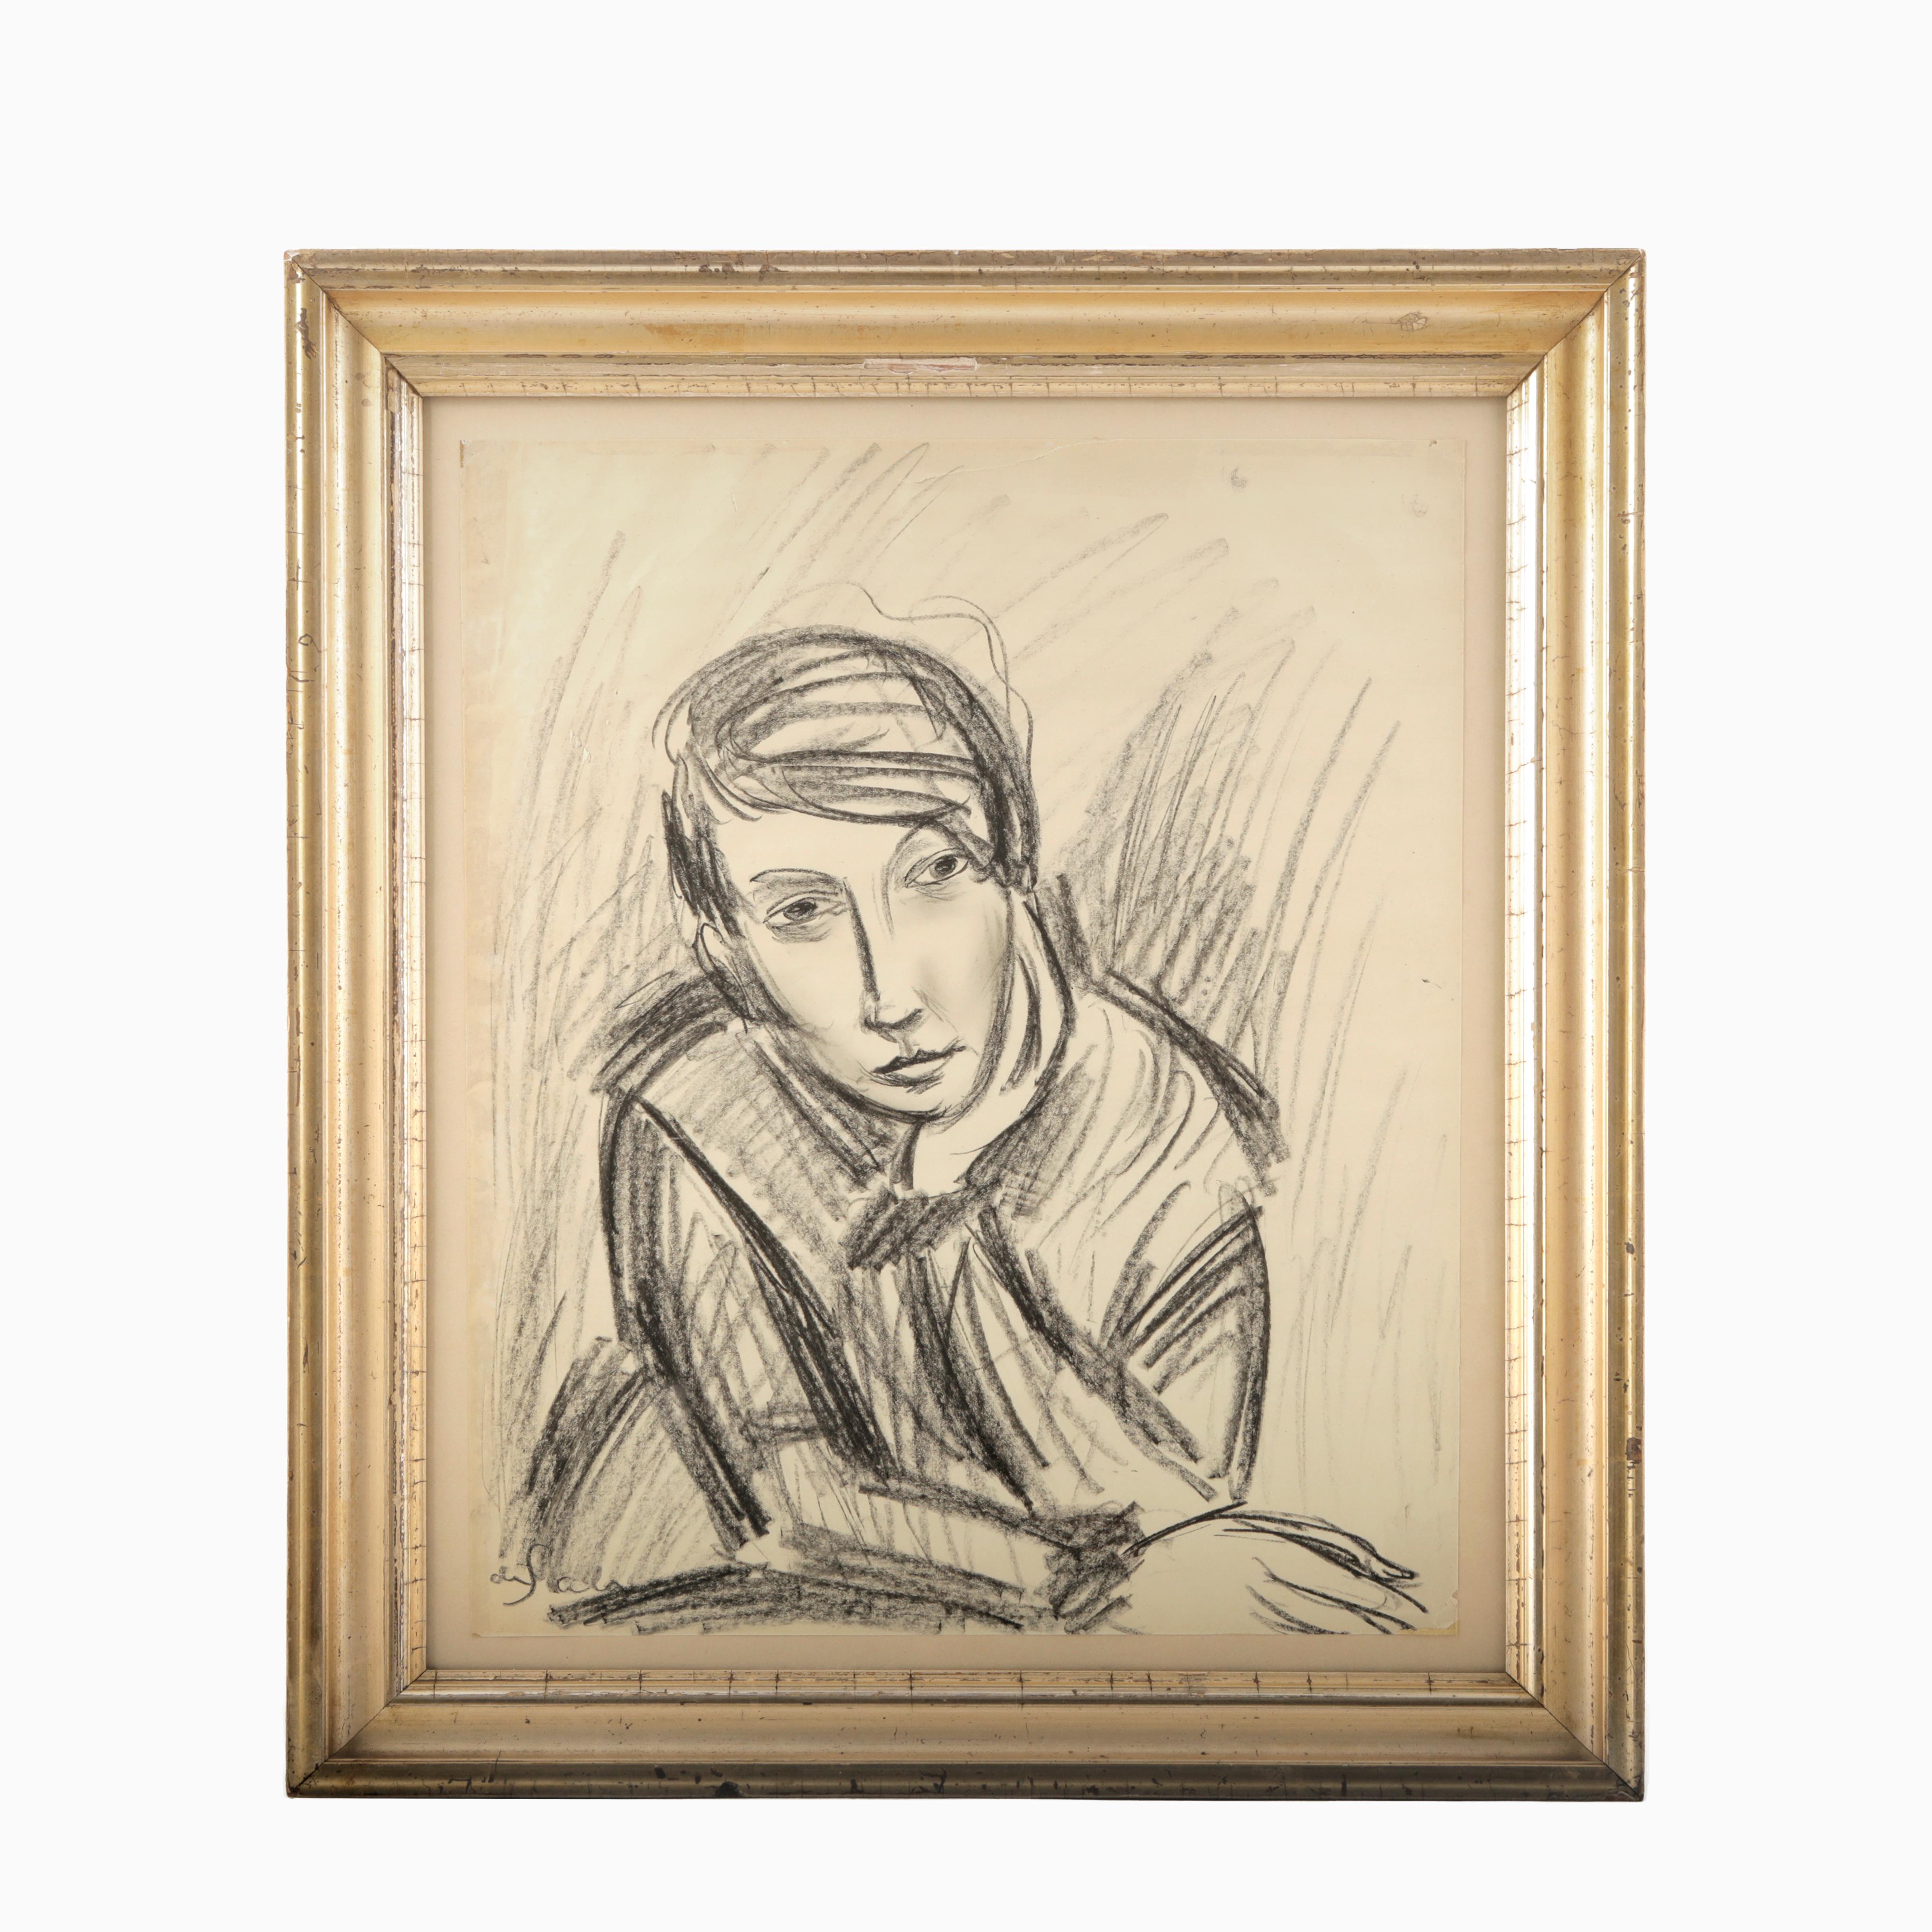 Eugène de Sala, 1899 - 1987.
Charcoal drawing on paper, portrait of his wife 1920s.
Eugène de Sala's an avant-garde painter from the 1920s are considered one of the first to introduce surrealism in Denmark.

framed in a beautiful silver frame from